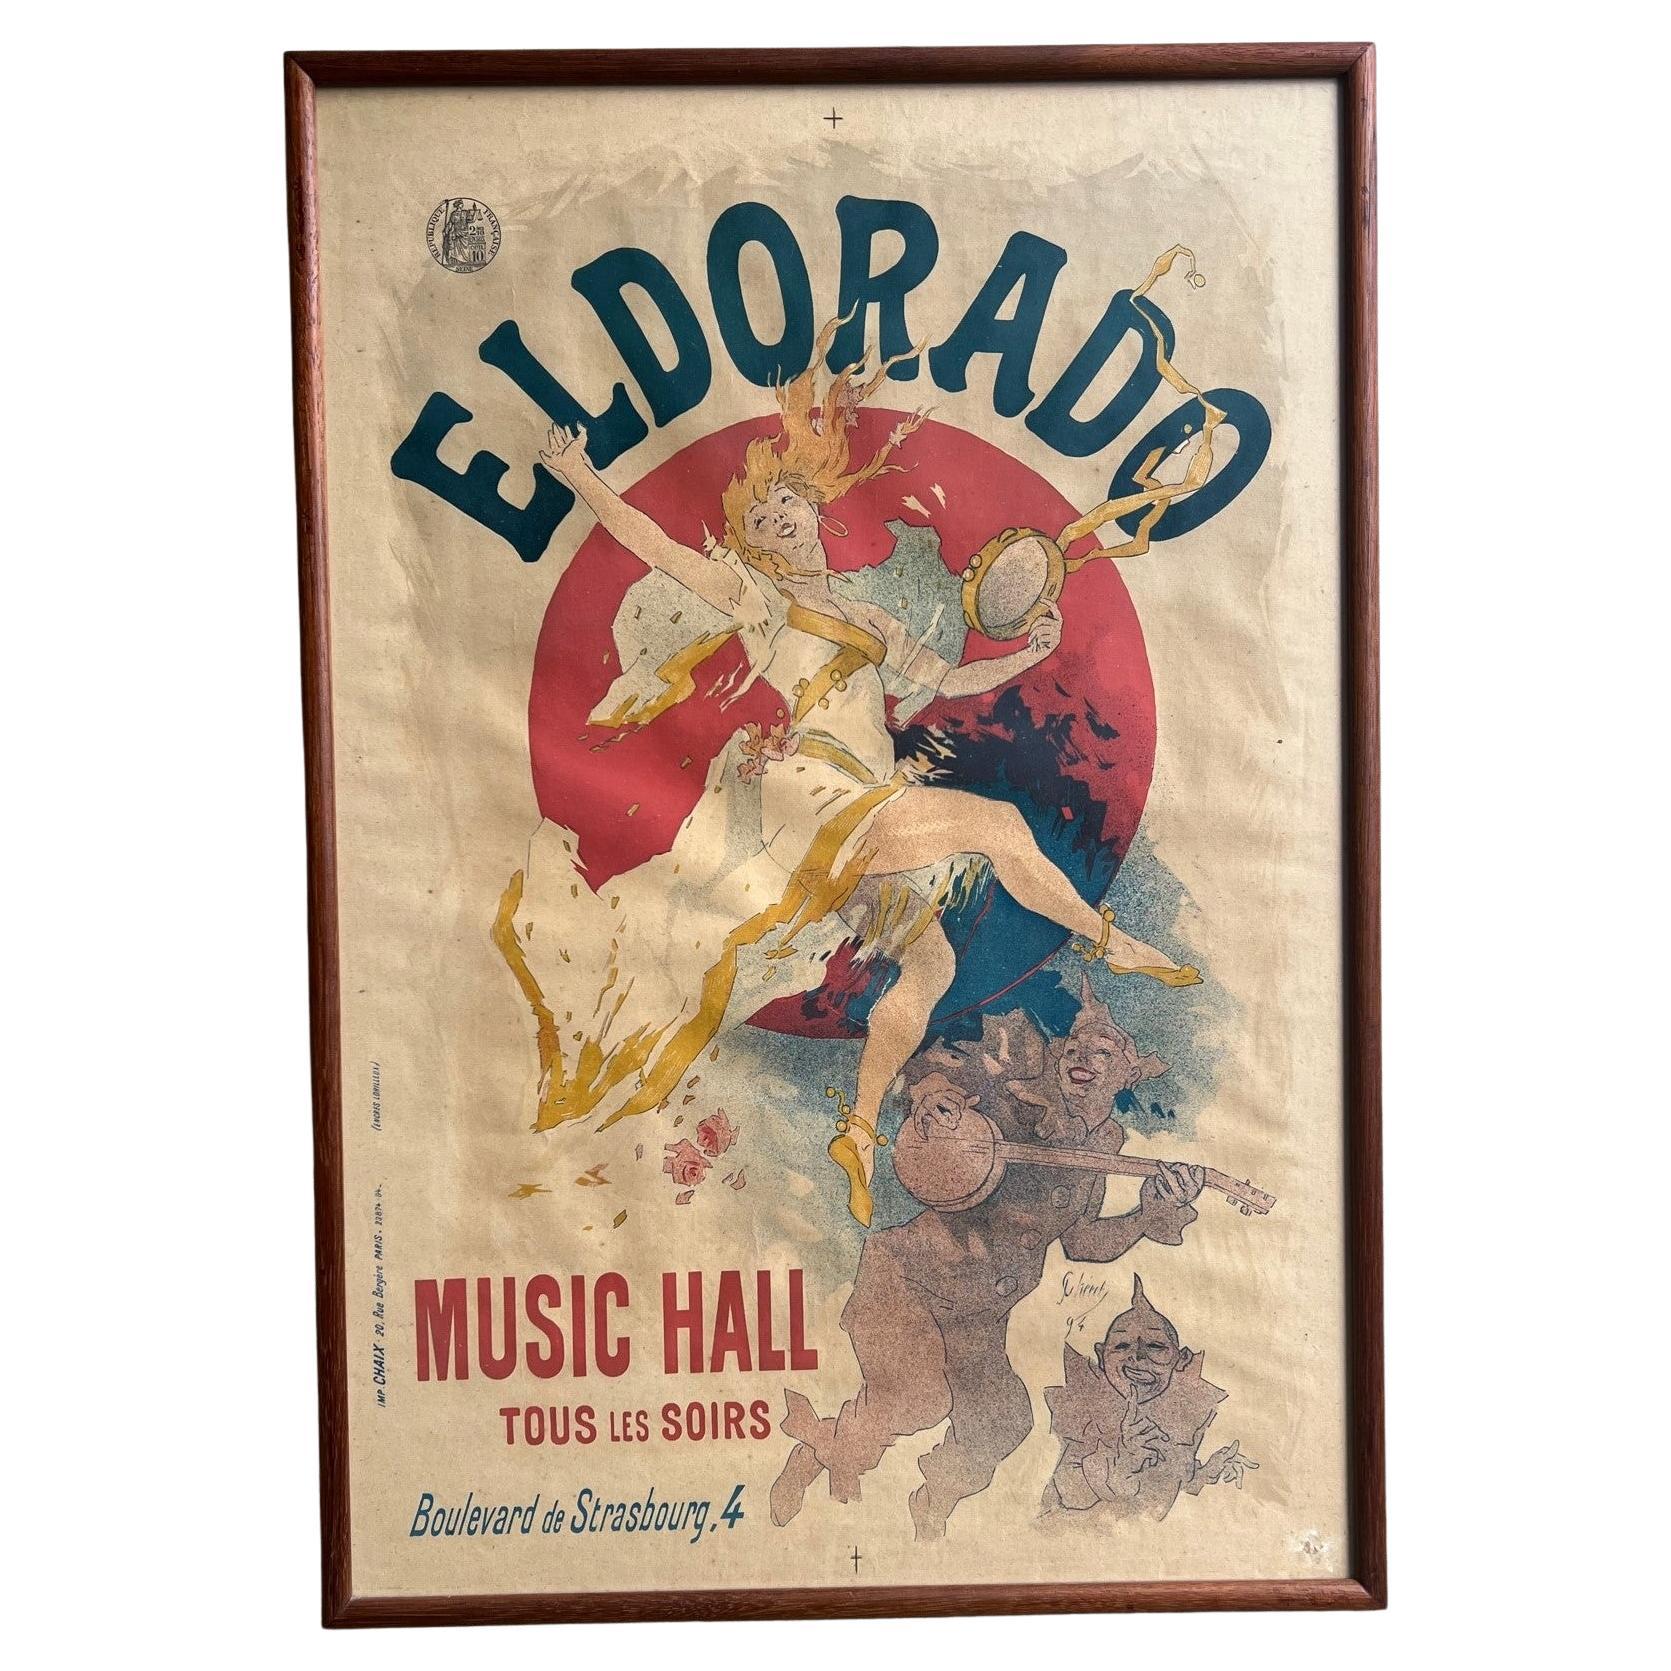 Art Nouveau style original Jules Cheret ( French 1836-1932) Eldorado Music Hall poster, circa 1894. The color is good and the poster is backed in linen and framed in a simple wood frame.

Measurement without the frame: 23 .25